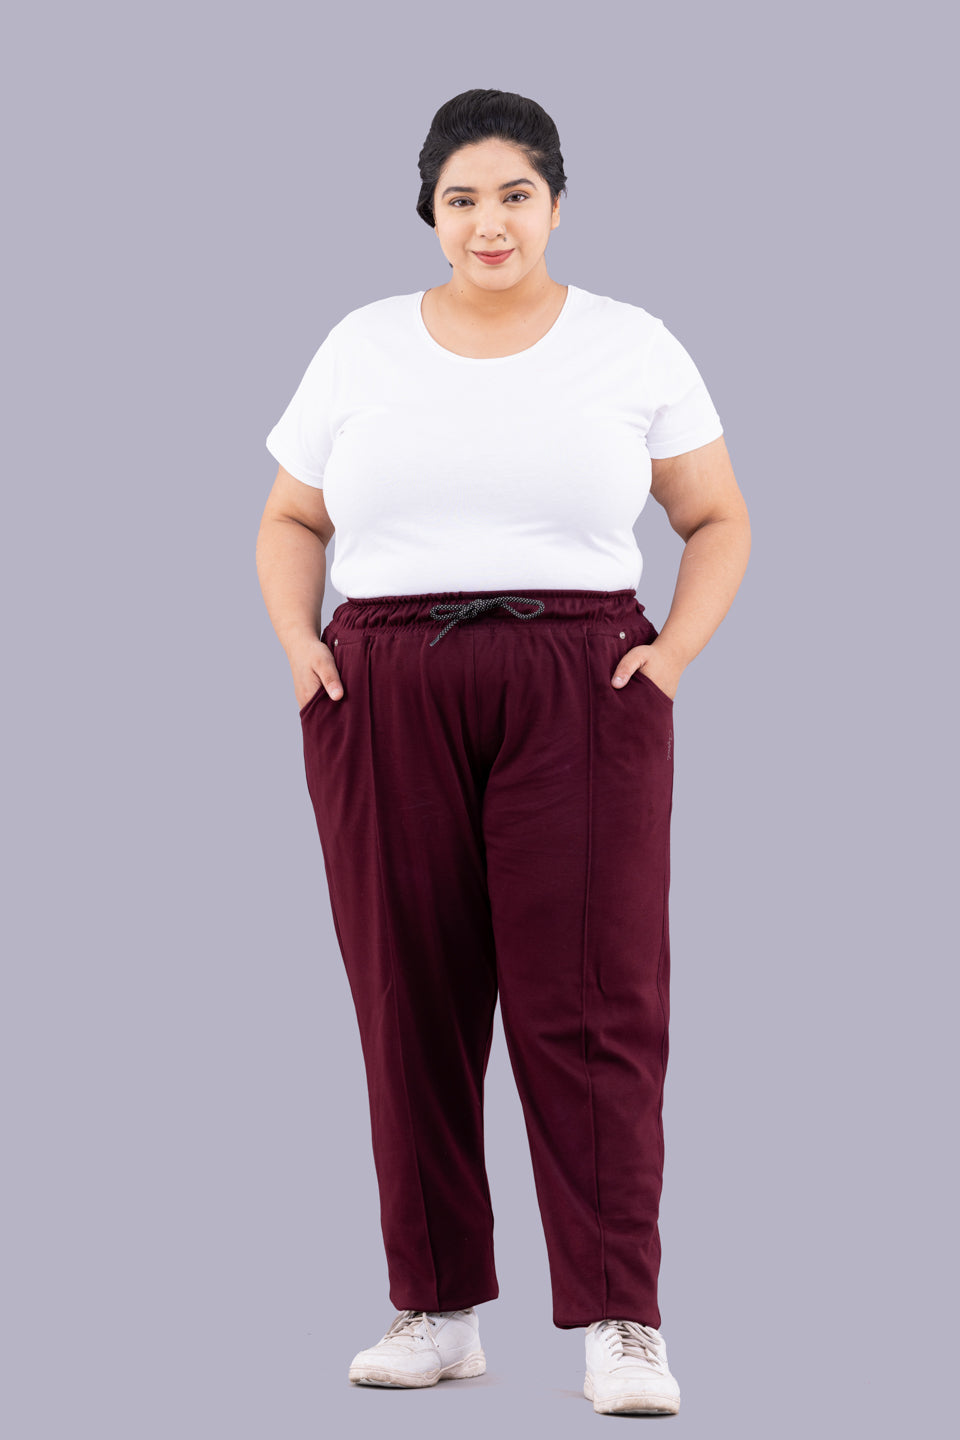 Comfy Wine Relaxed Fit Cotton Trackpants for Women online in India at best prices